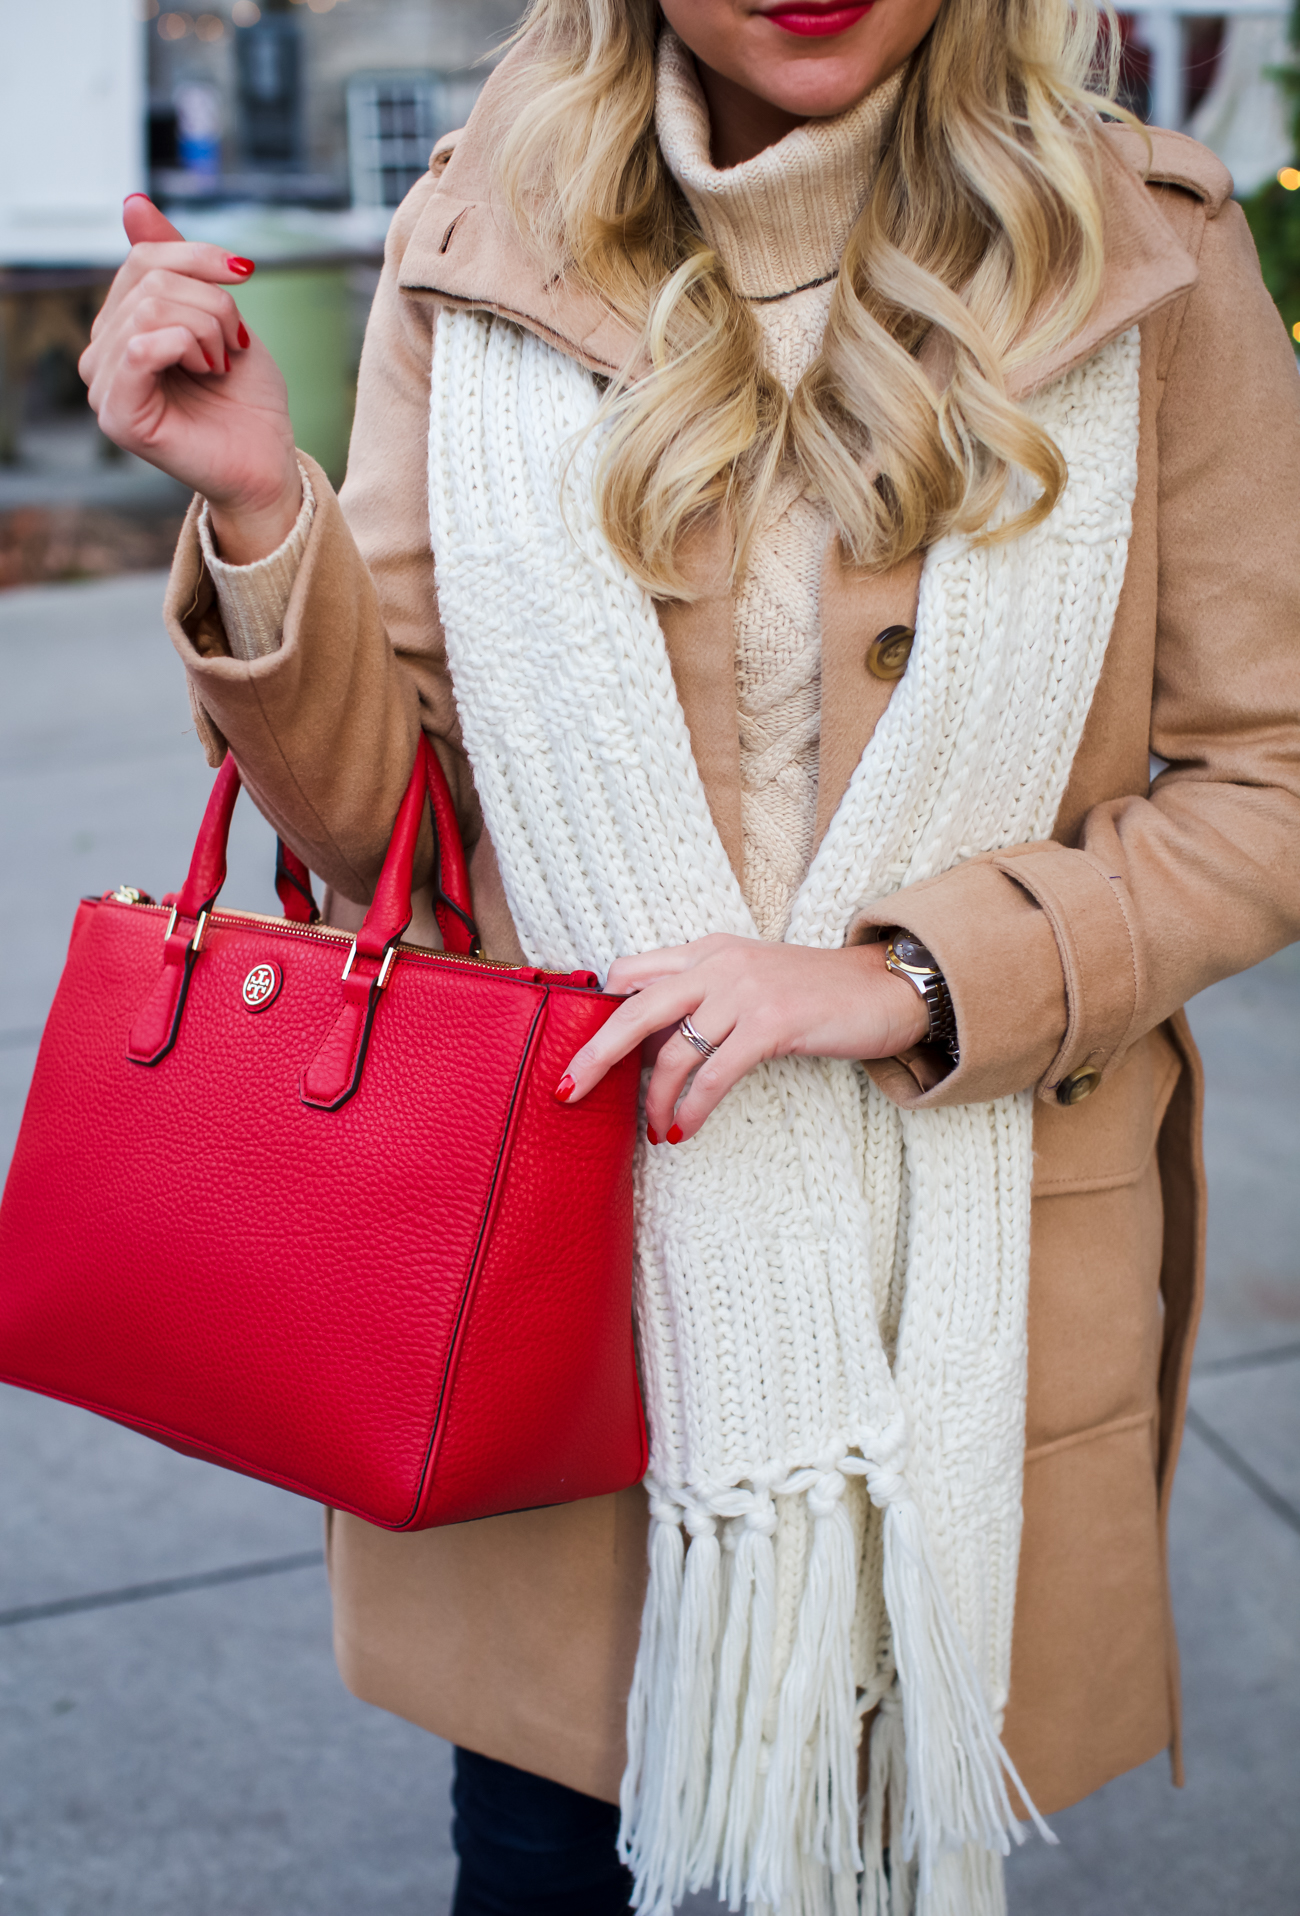 Loft Coat in tan with Nordstrom Topshop Knit Scarf with Ugg Lace Up Boots  Waterproof and Tory Burch Robinson Square Tote in Red-9 - SHOP DANDY | A  florida based style and